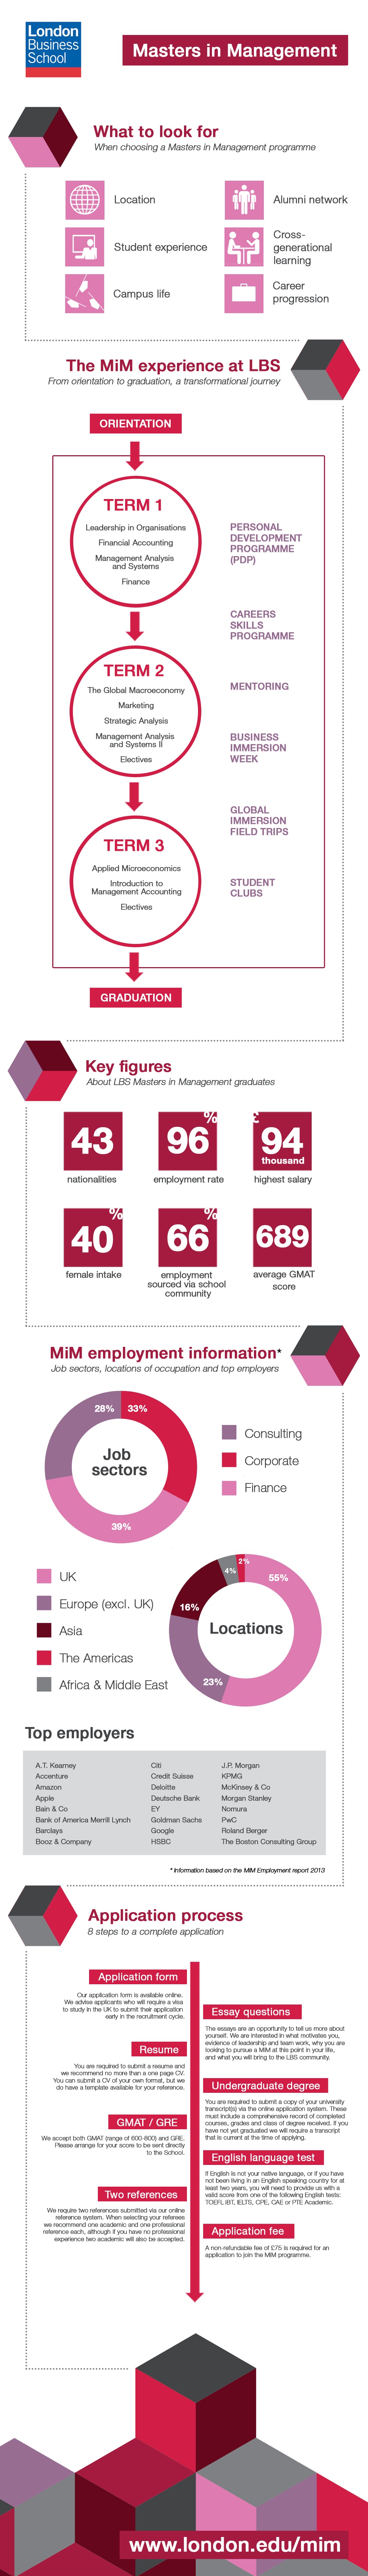 London Business School Masters in Management Infographic